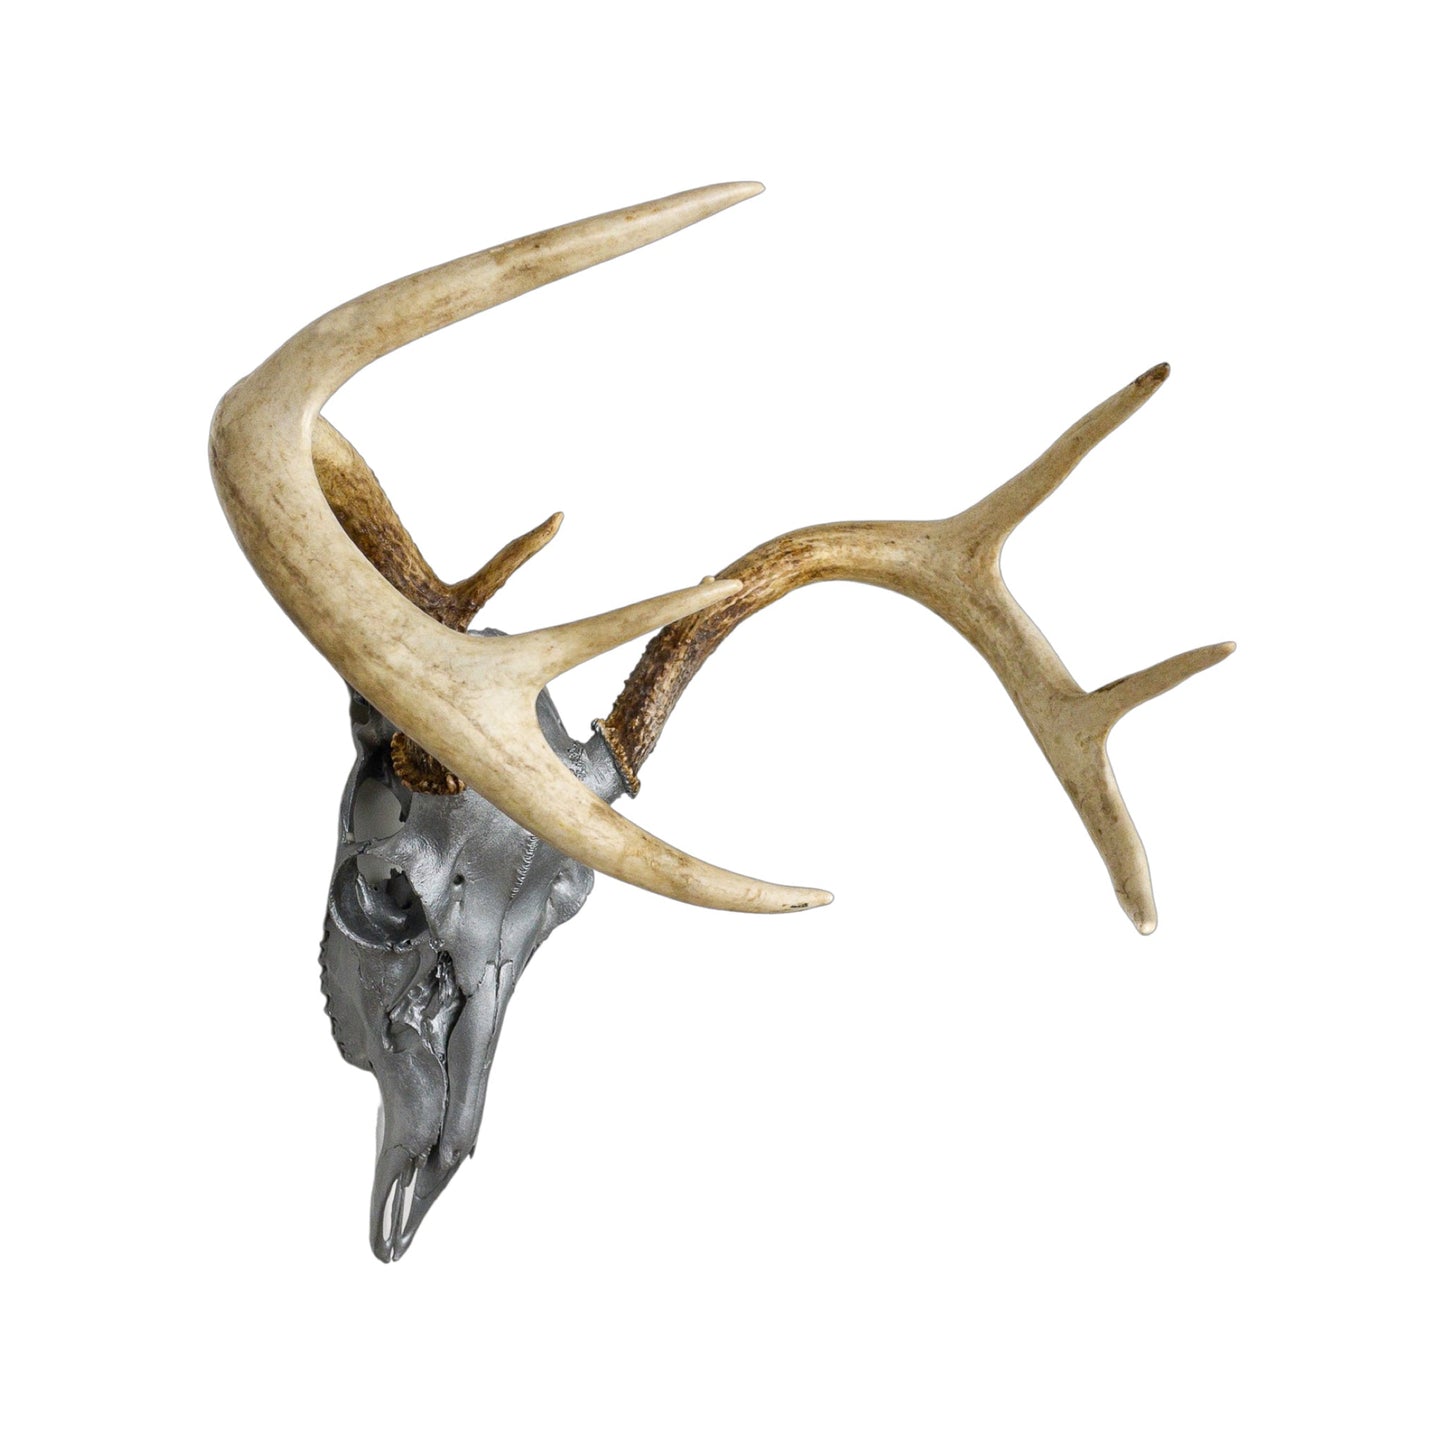 A Home Decor Taxidermy White-Tailed Deer Silver Painted European Skull of Grade Respectable